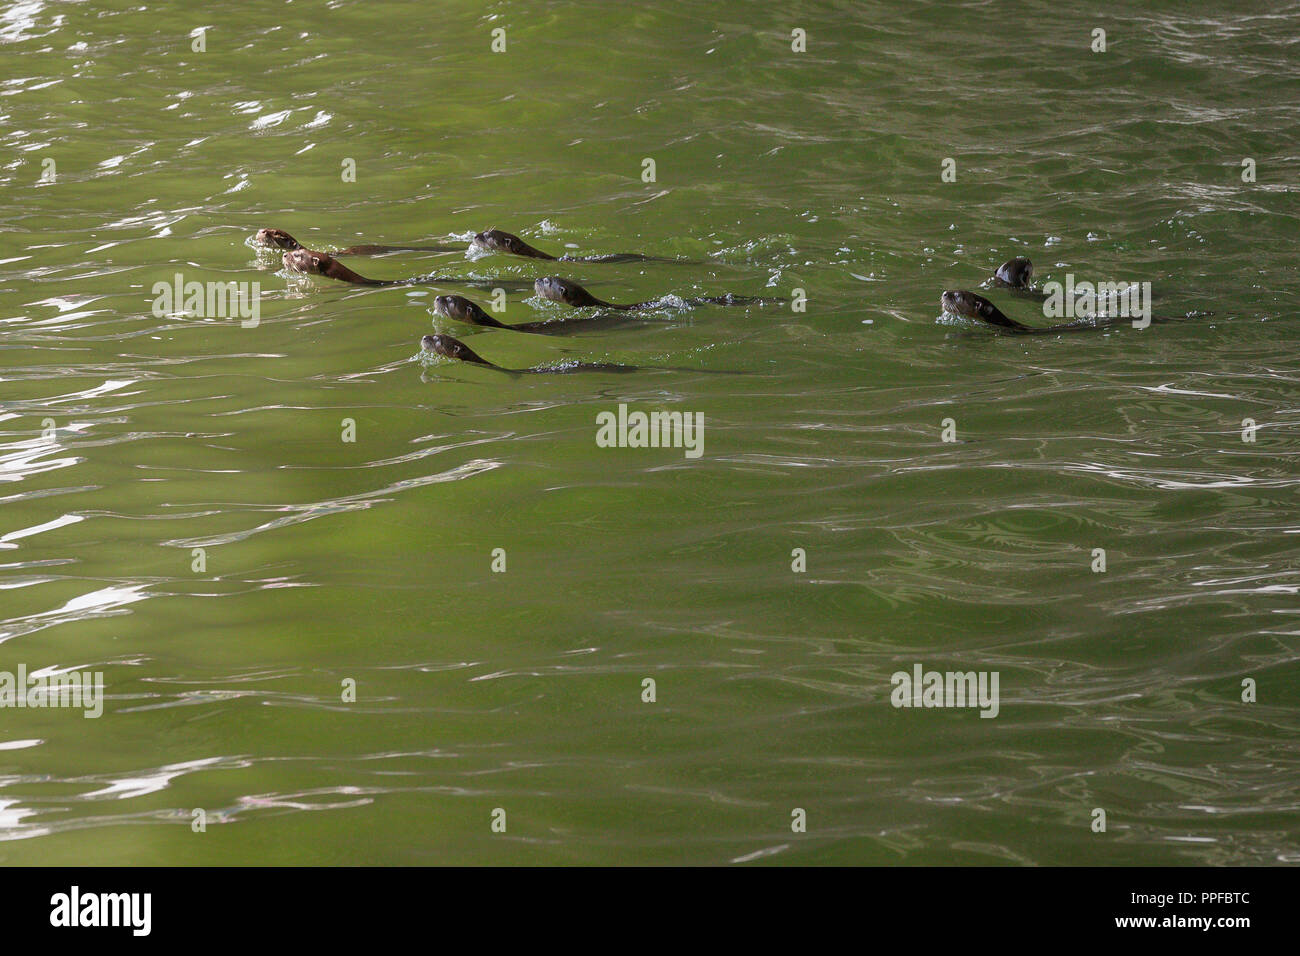 Family of Smooth Coated Otters hunting in Marina Bay Singapore Stock Photo